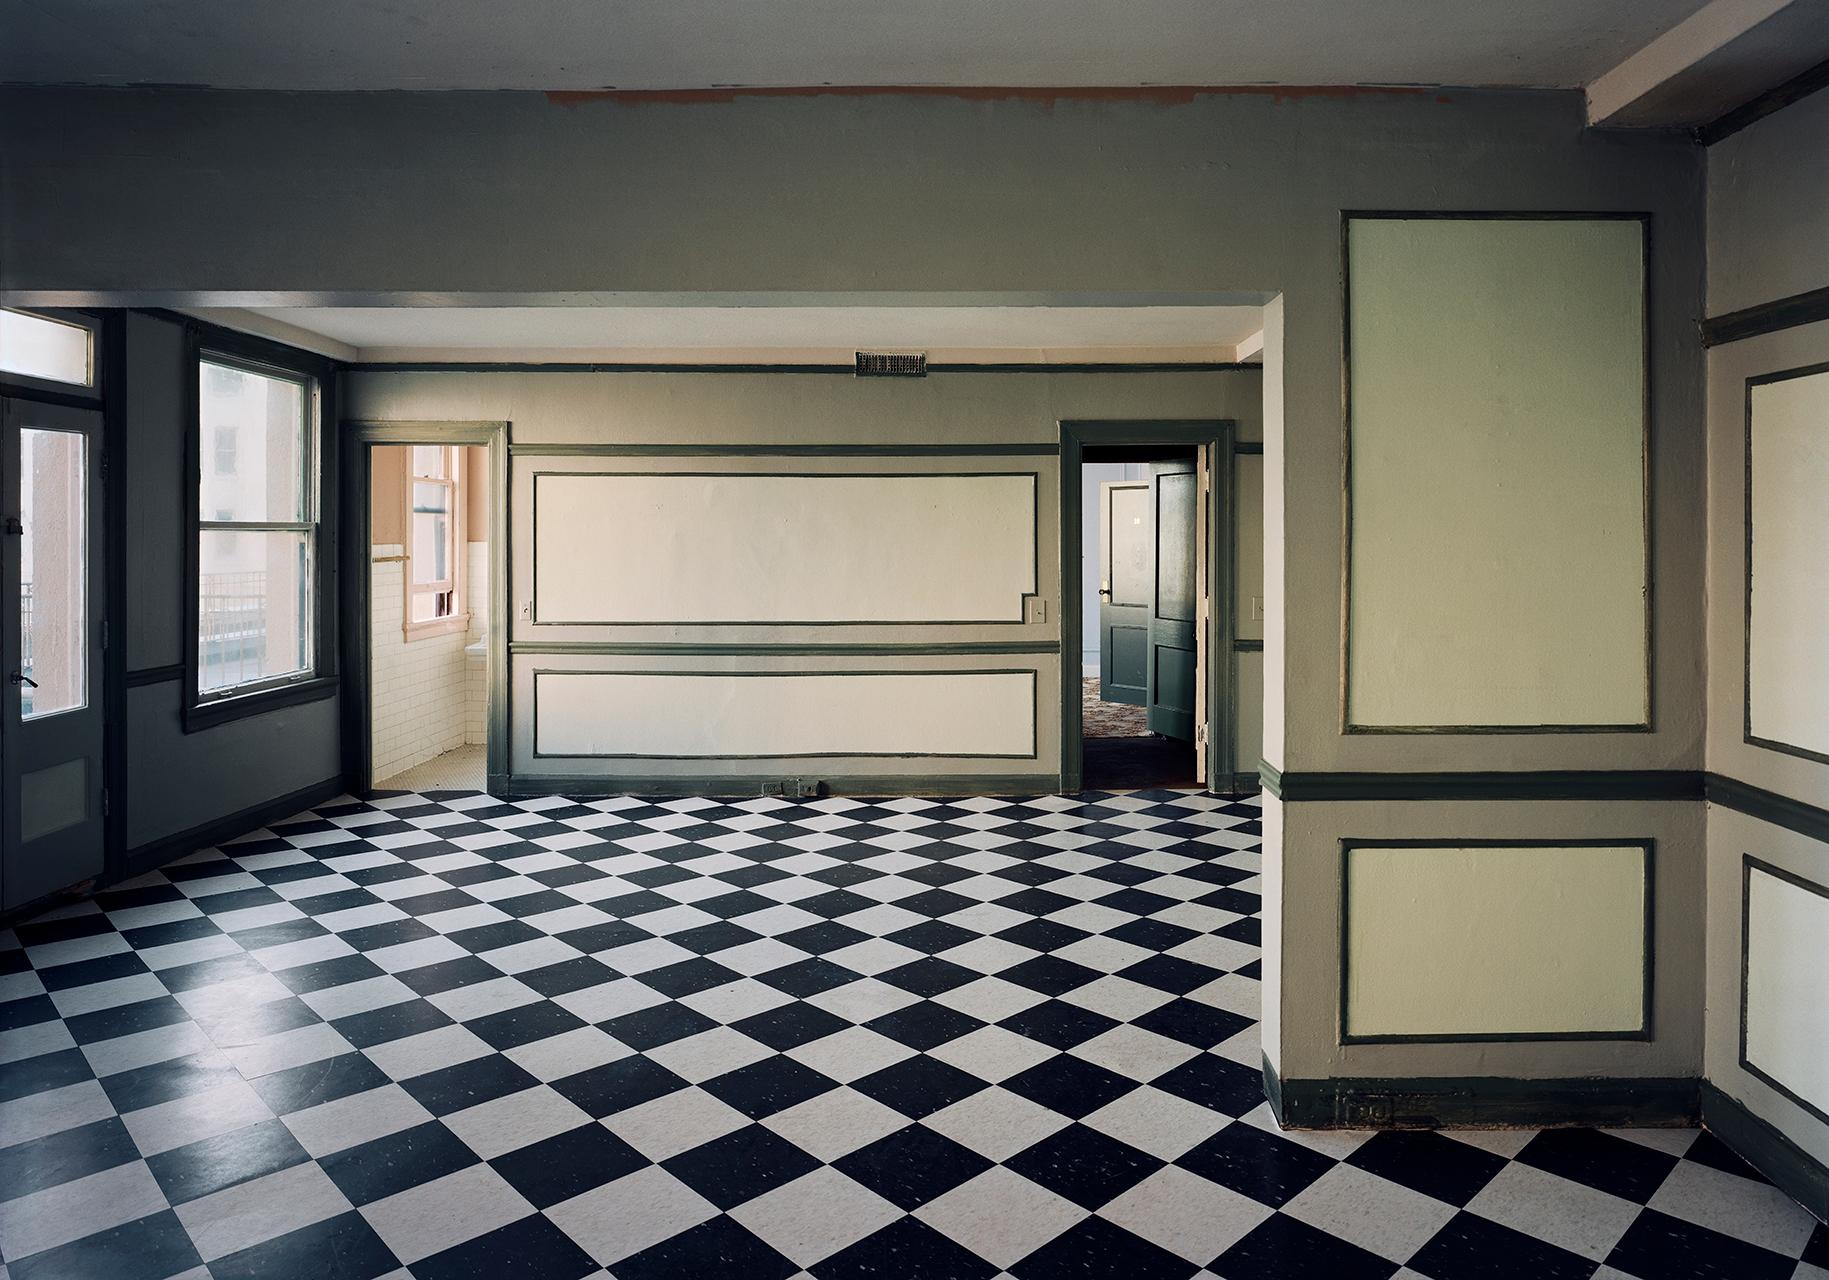 In 2005, mere weeks before the demolition of the Ambassador Hotel (and the Cocoanut Grove), Robert Polidori captured the faded grandeur of one of Los Angeles's most legendary establishments. Working closely with Polidori, The Lapis Press selected